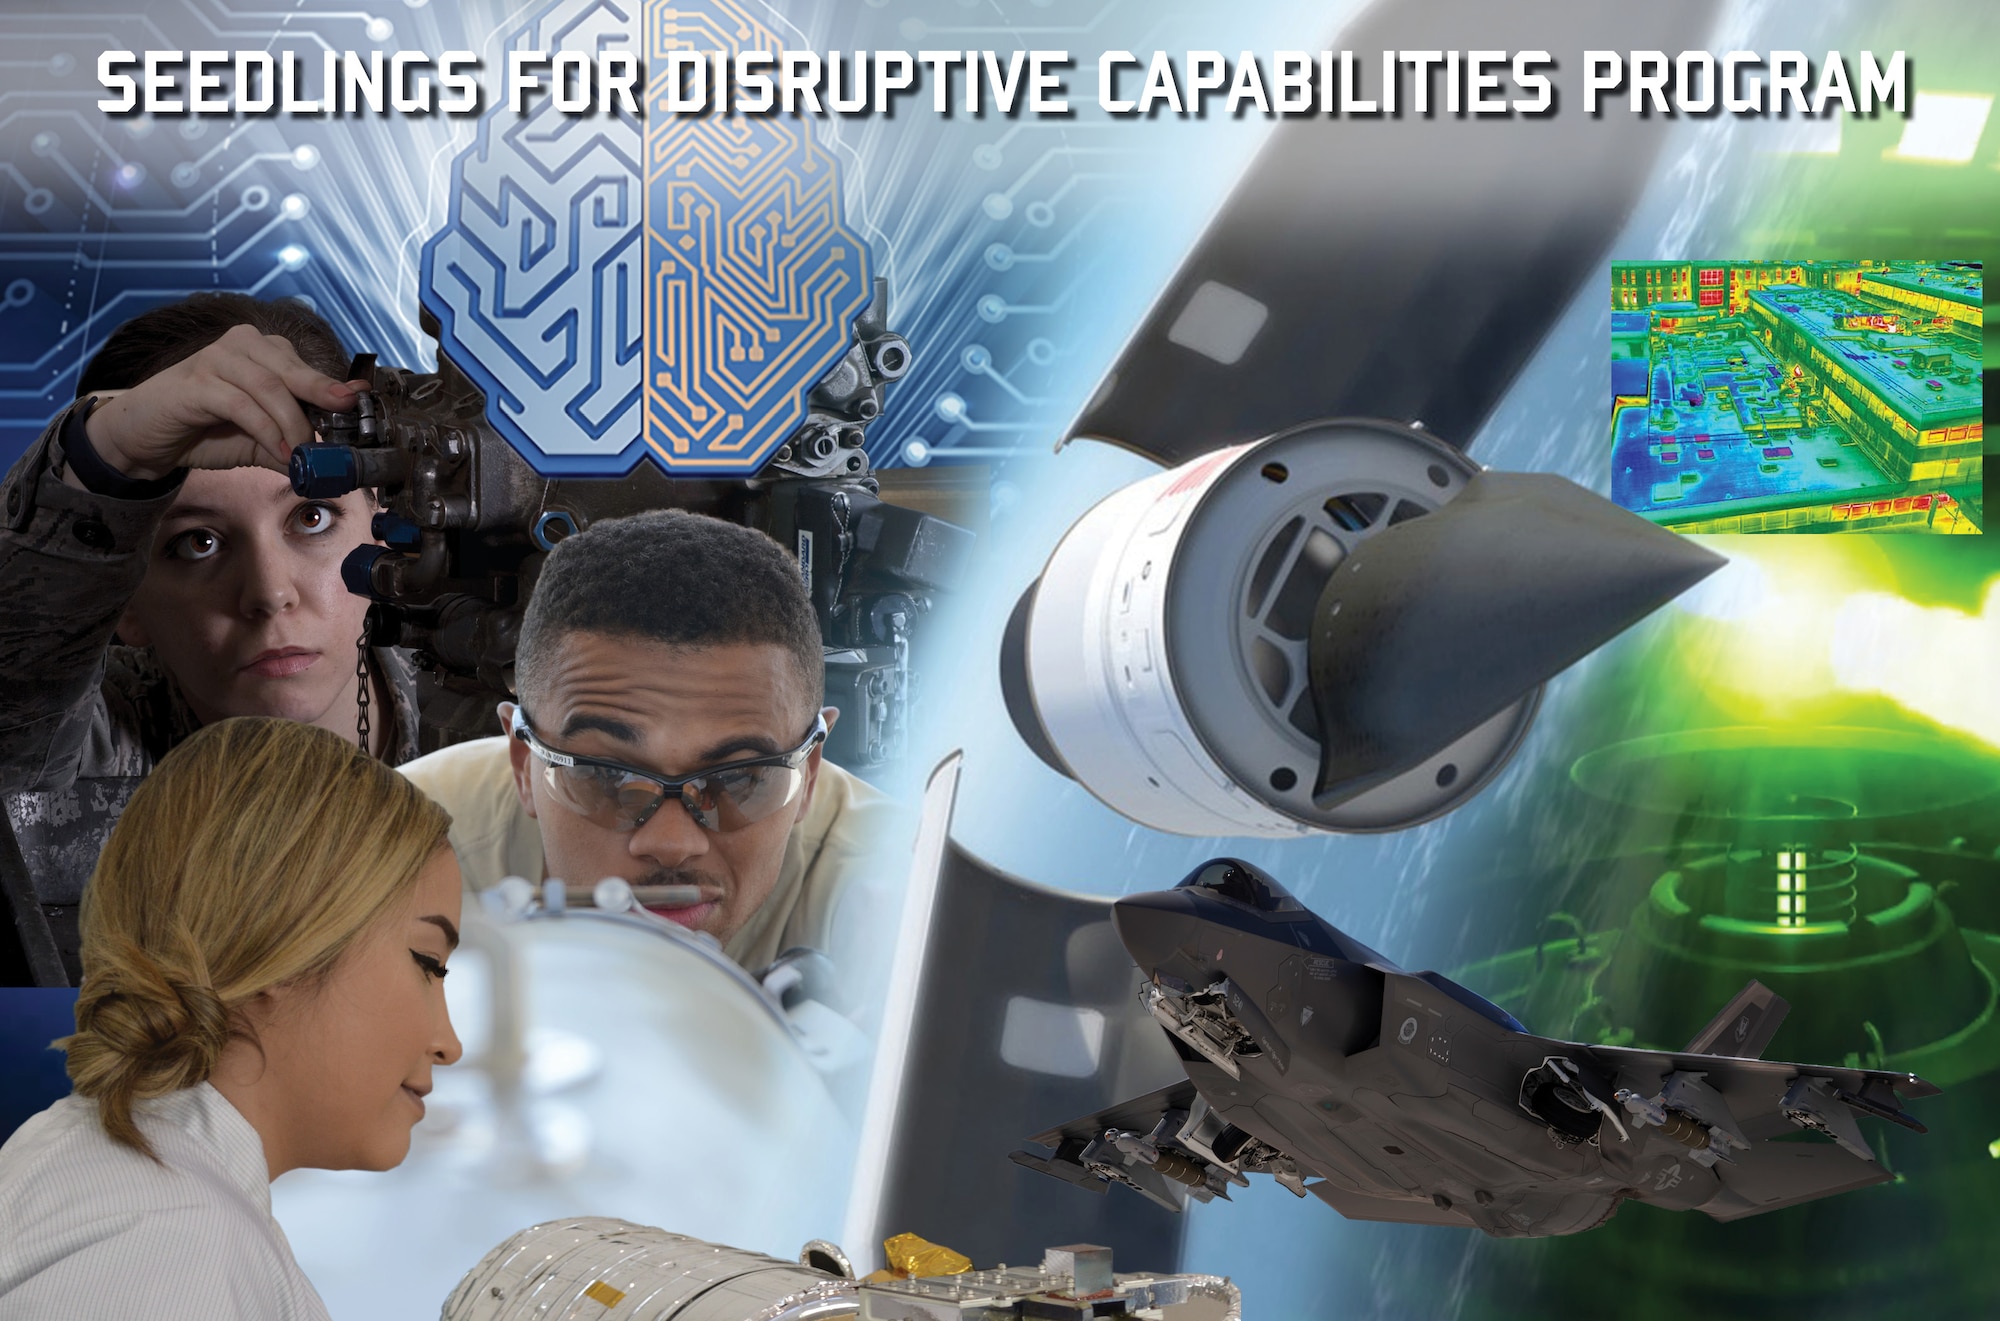 Seven teams led by Air Force Research Laboratory scientists and engineers will each receive $3 to $5 million per year as part of the Seedlings for Disruptive Capabilities Program (SDCP) to execute three-year projects and advance ideas that may create remarkable new capabilities for the future force. (U.S. Air Force illustration/Randy Palmer)